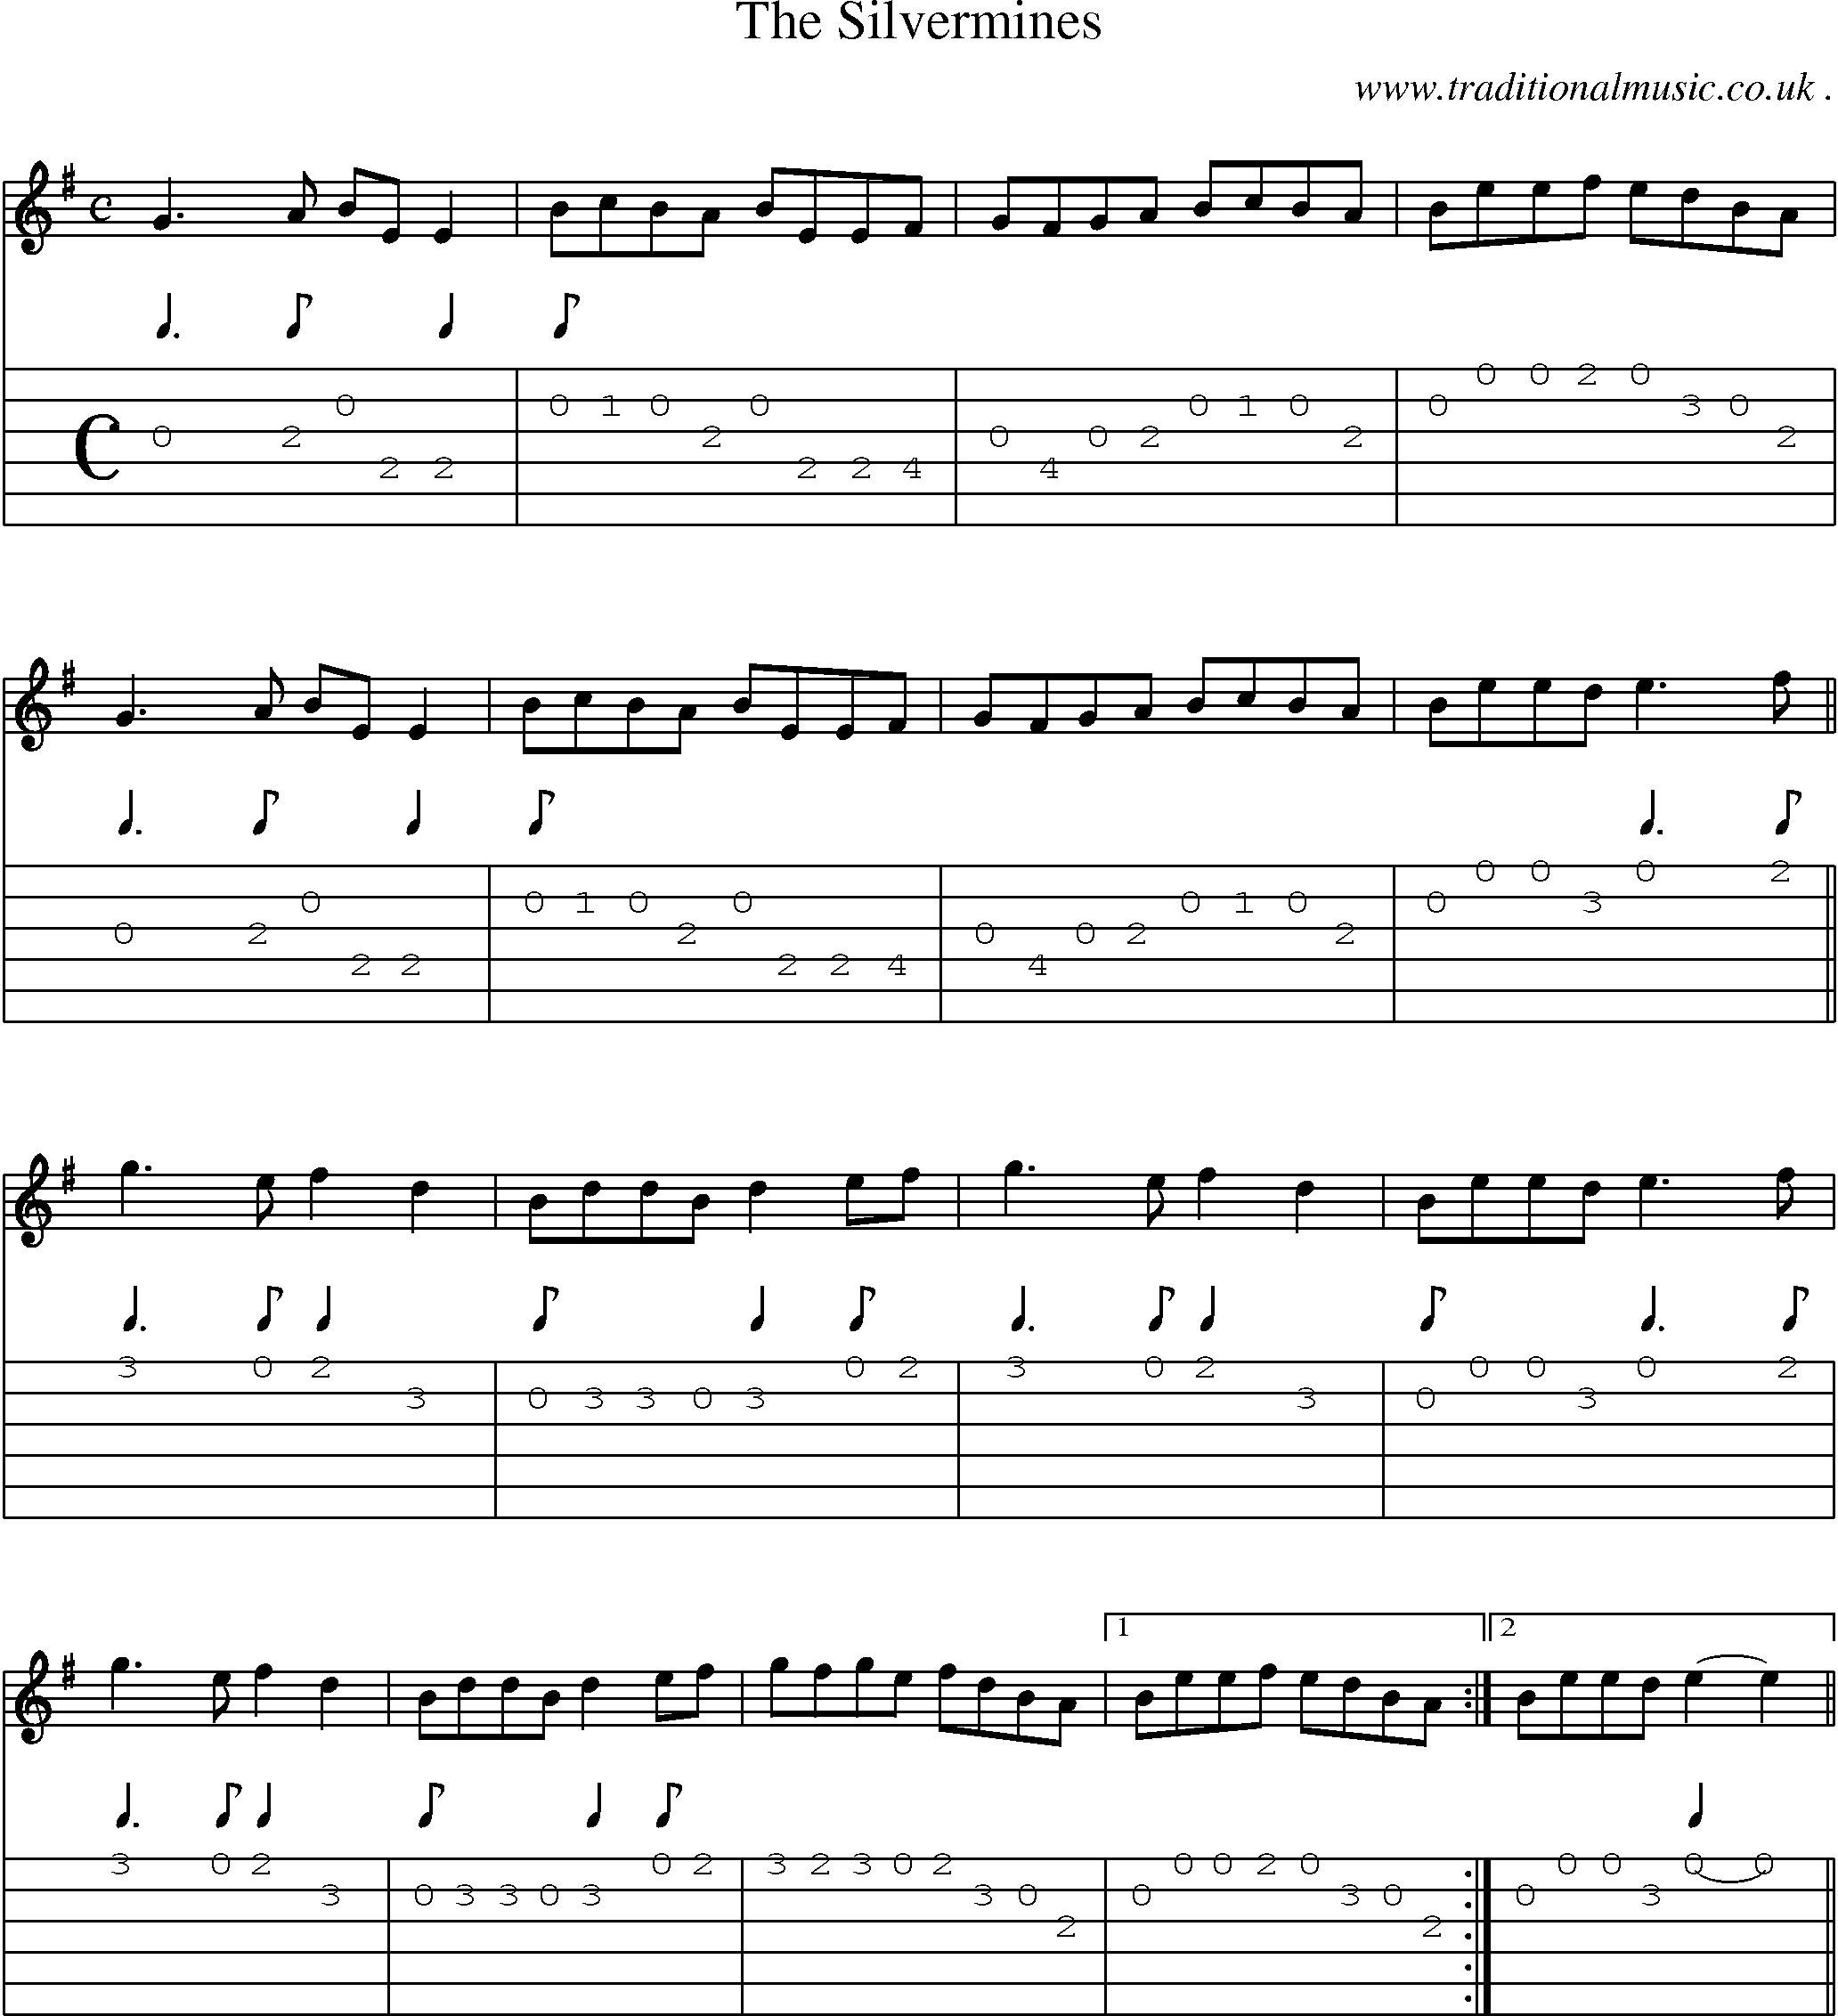 Sheet-Music and Guitar Tabs for The Silvermines